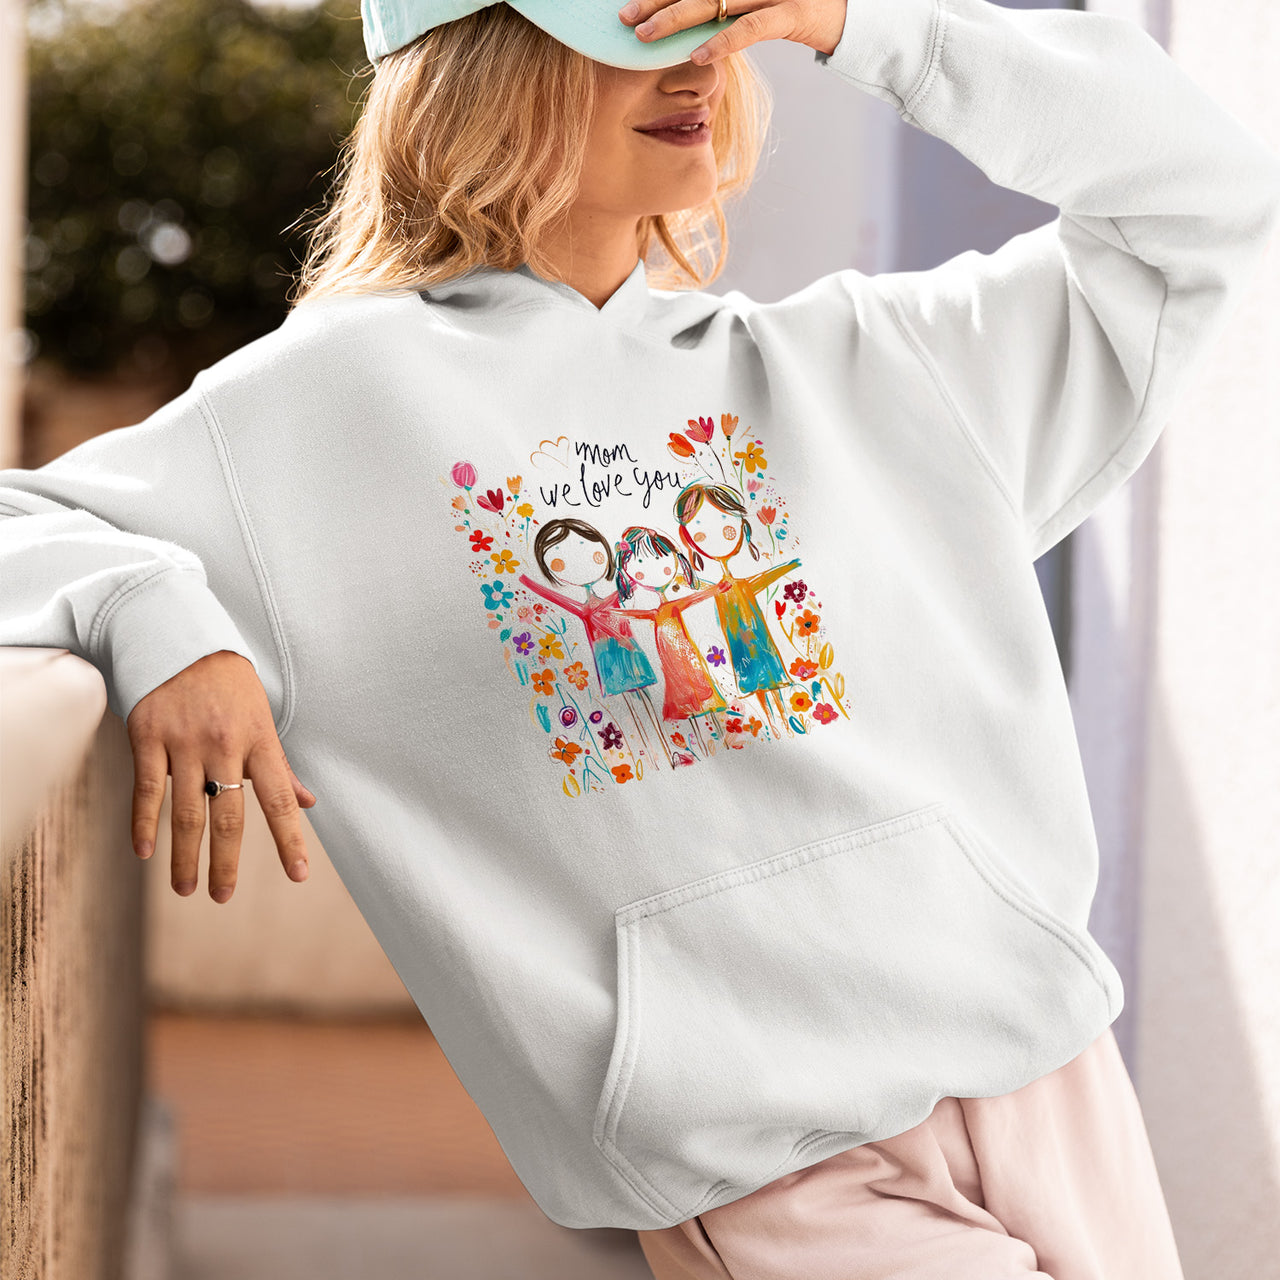 Mom And Children Sweatshirt, Family Drawing Shirt, Kids Drawing Shirt, Mom Shirt With Kids Art, Mama Shirt, Mom Shirt, Mother's Day Gift, Happy Mother's Day